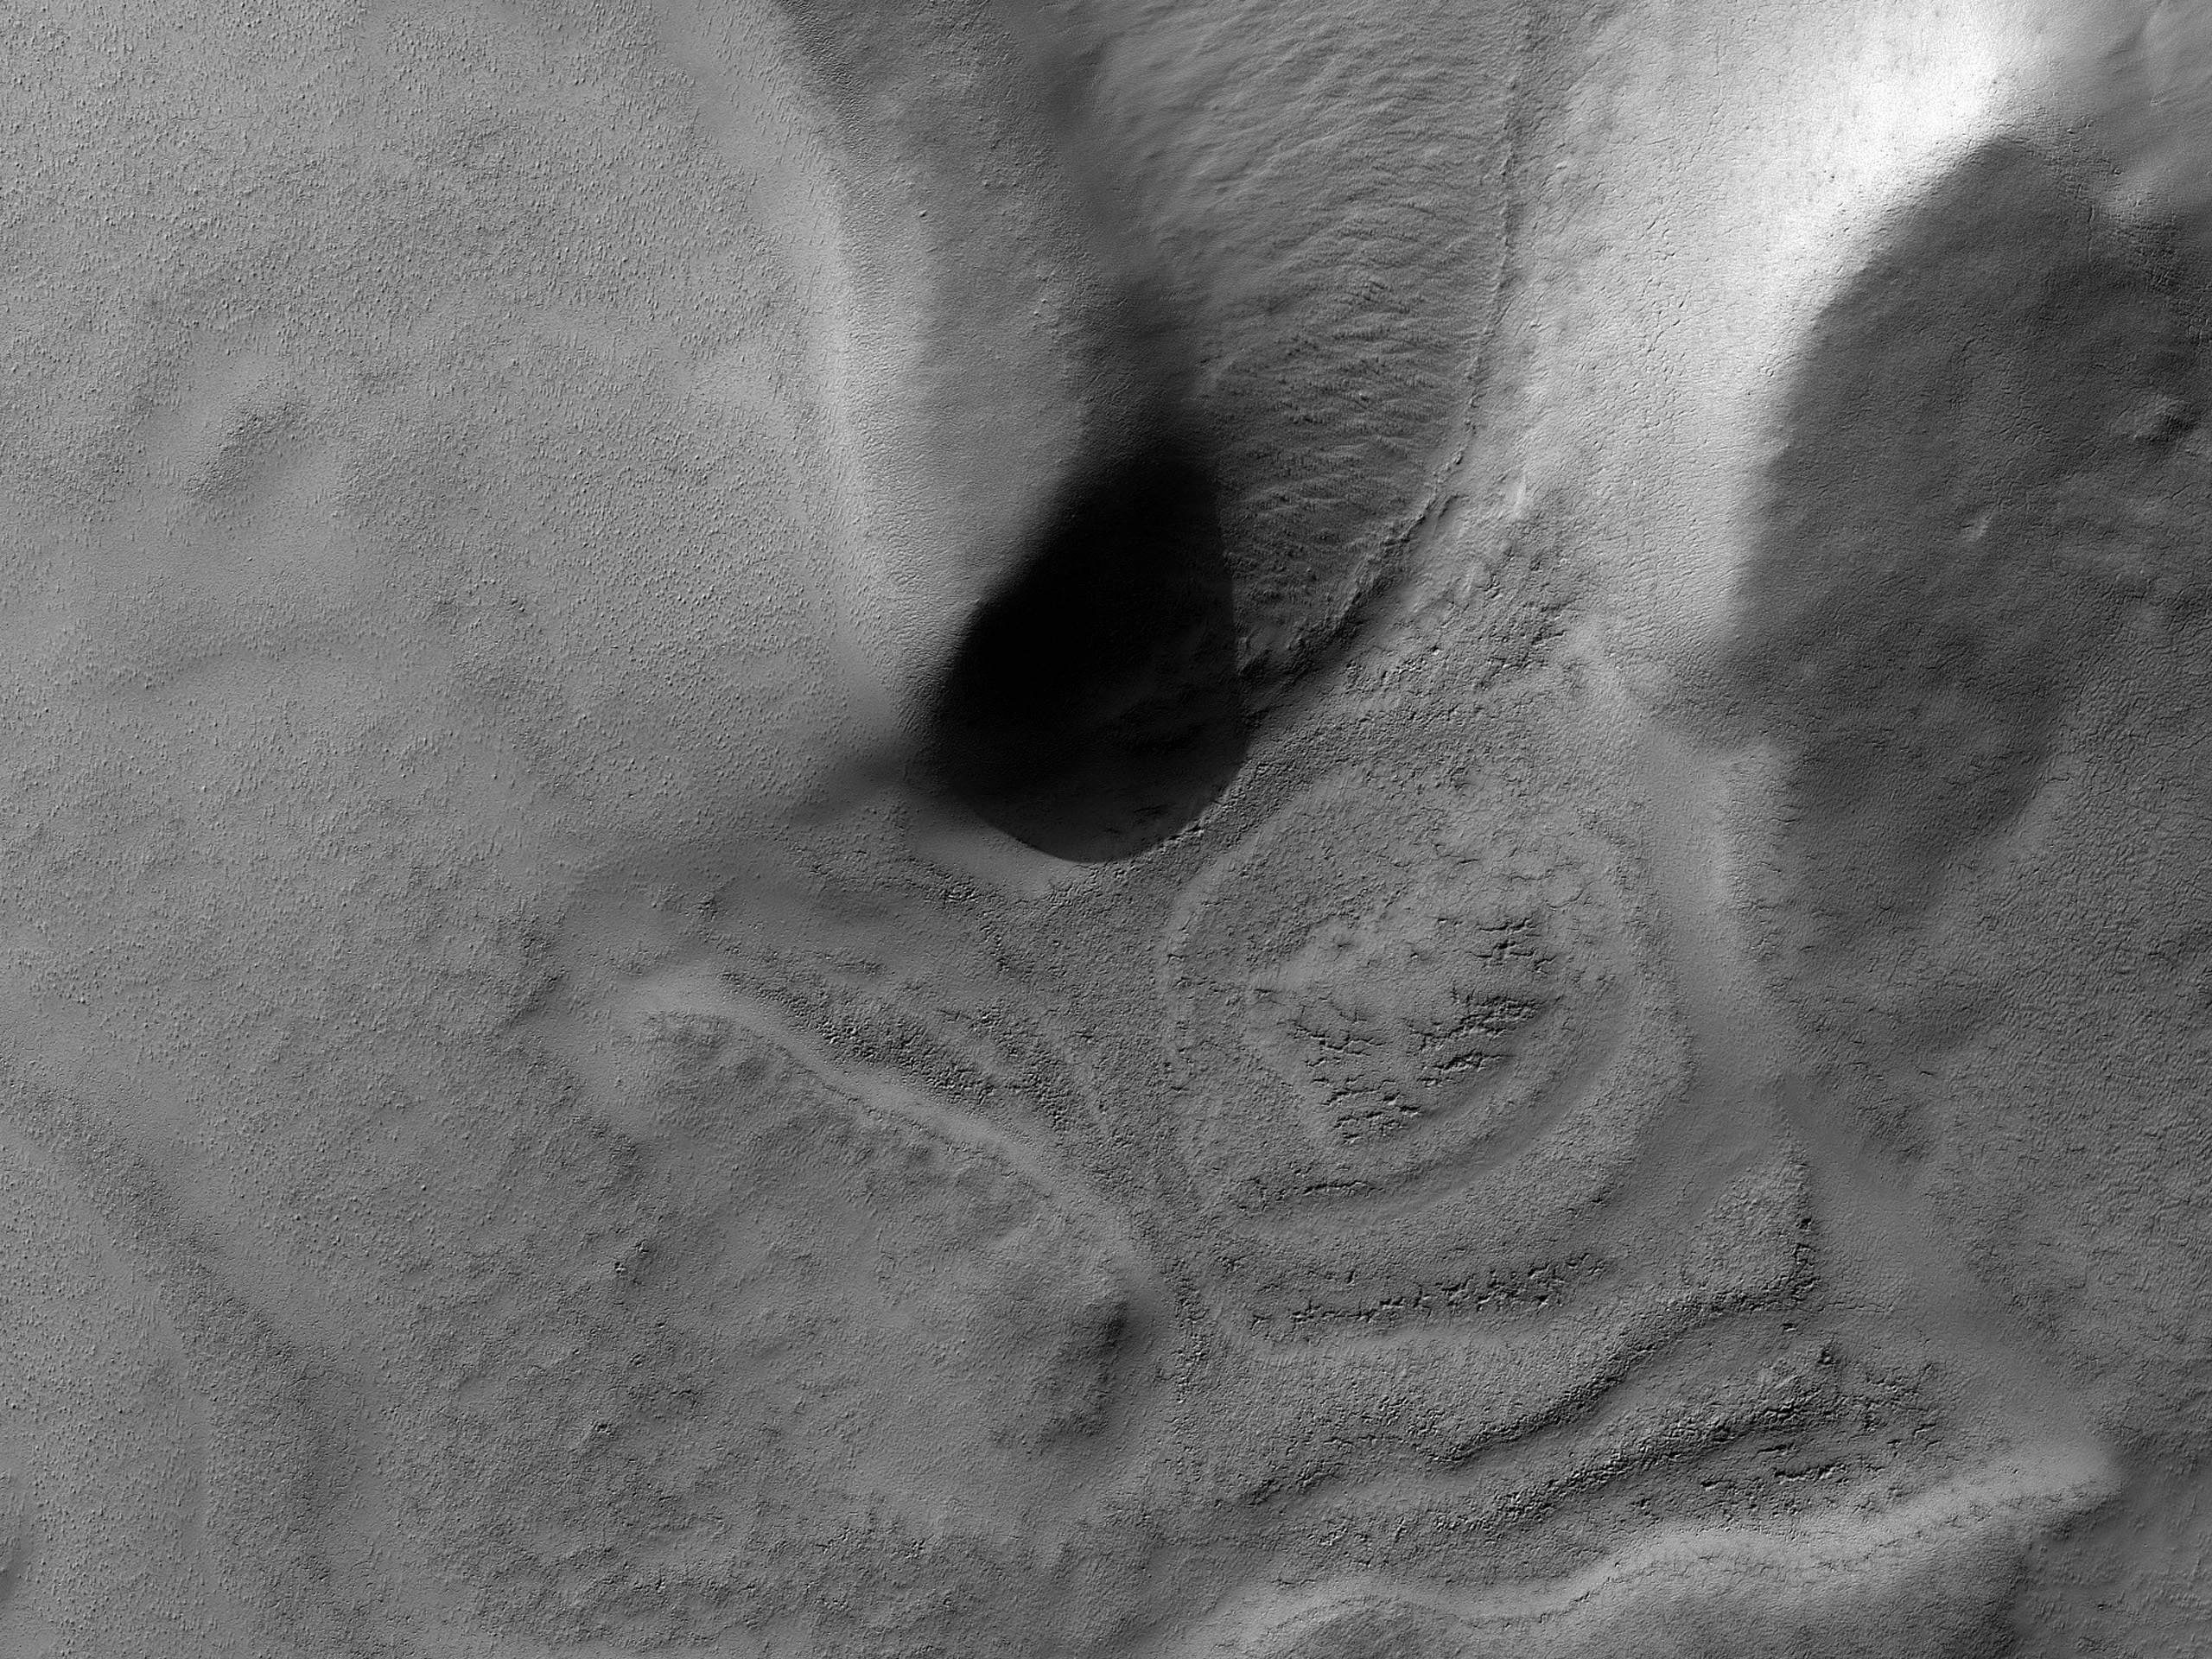 Depression Adjacent to Crater in South Polar Region